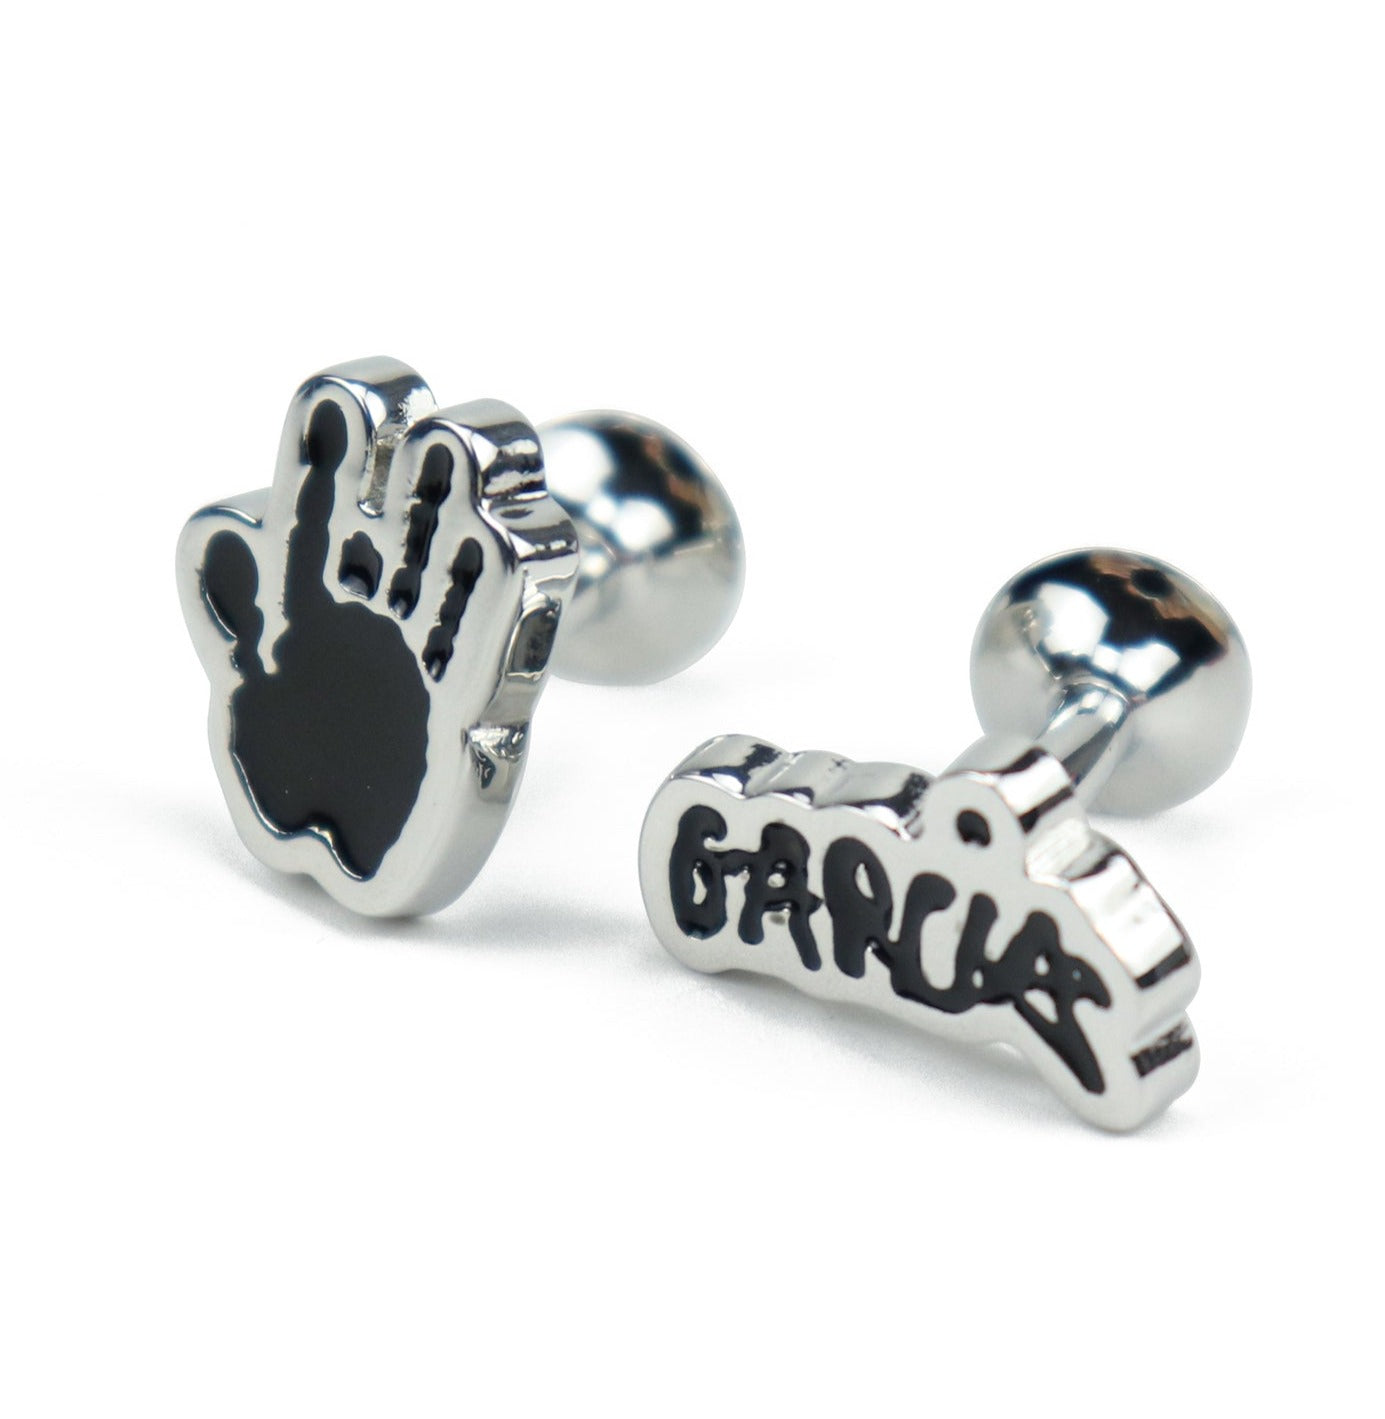 Jerry Garcia Middle Finger Cufflinks - Section 119